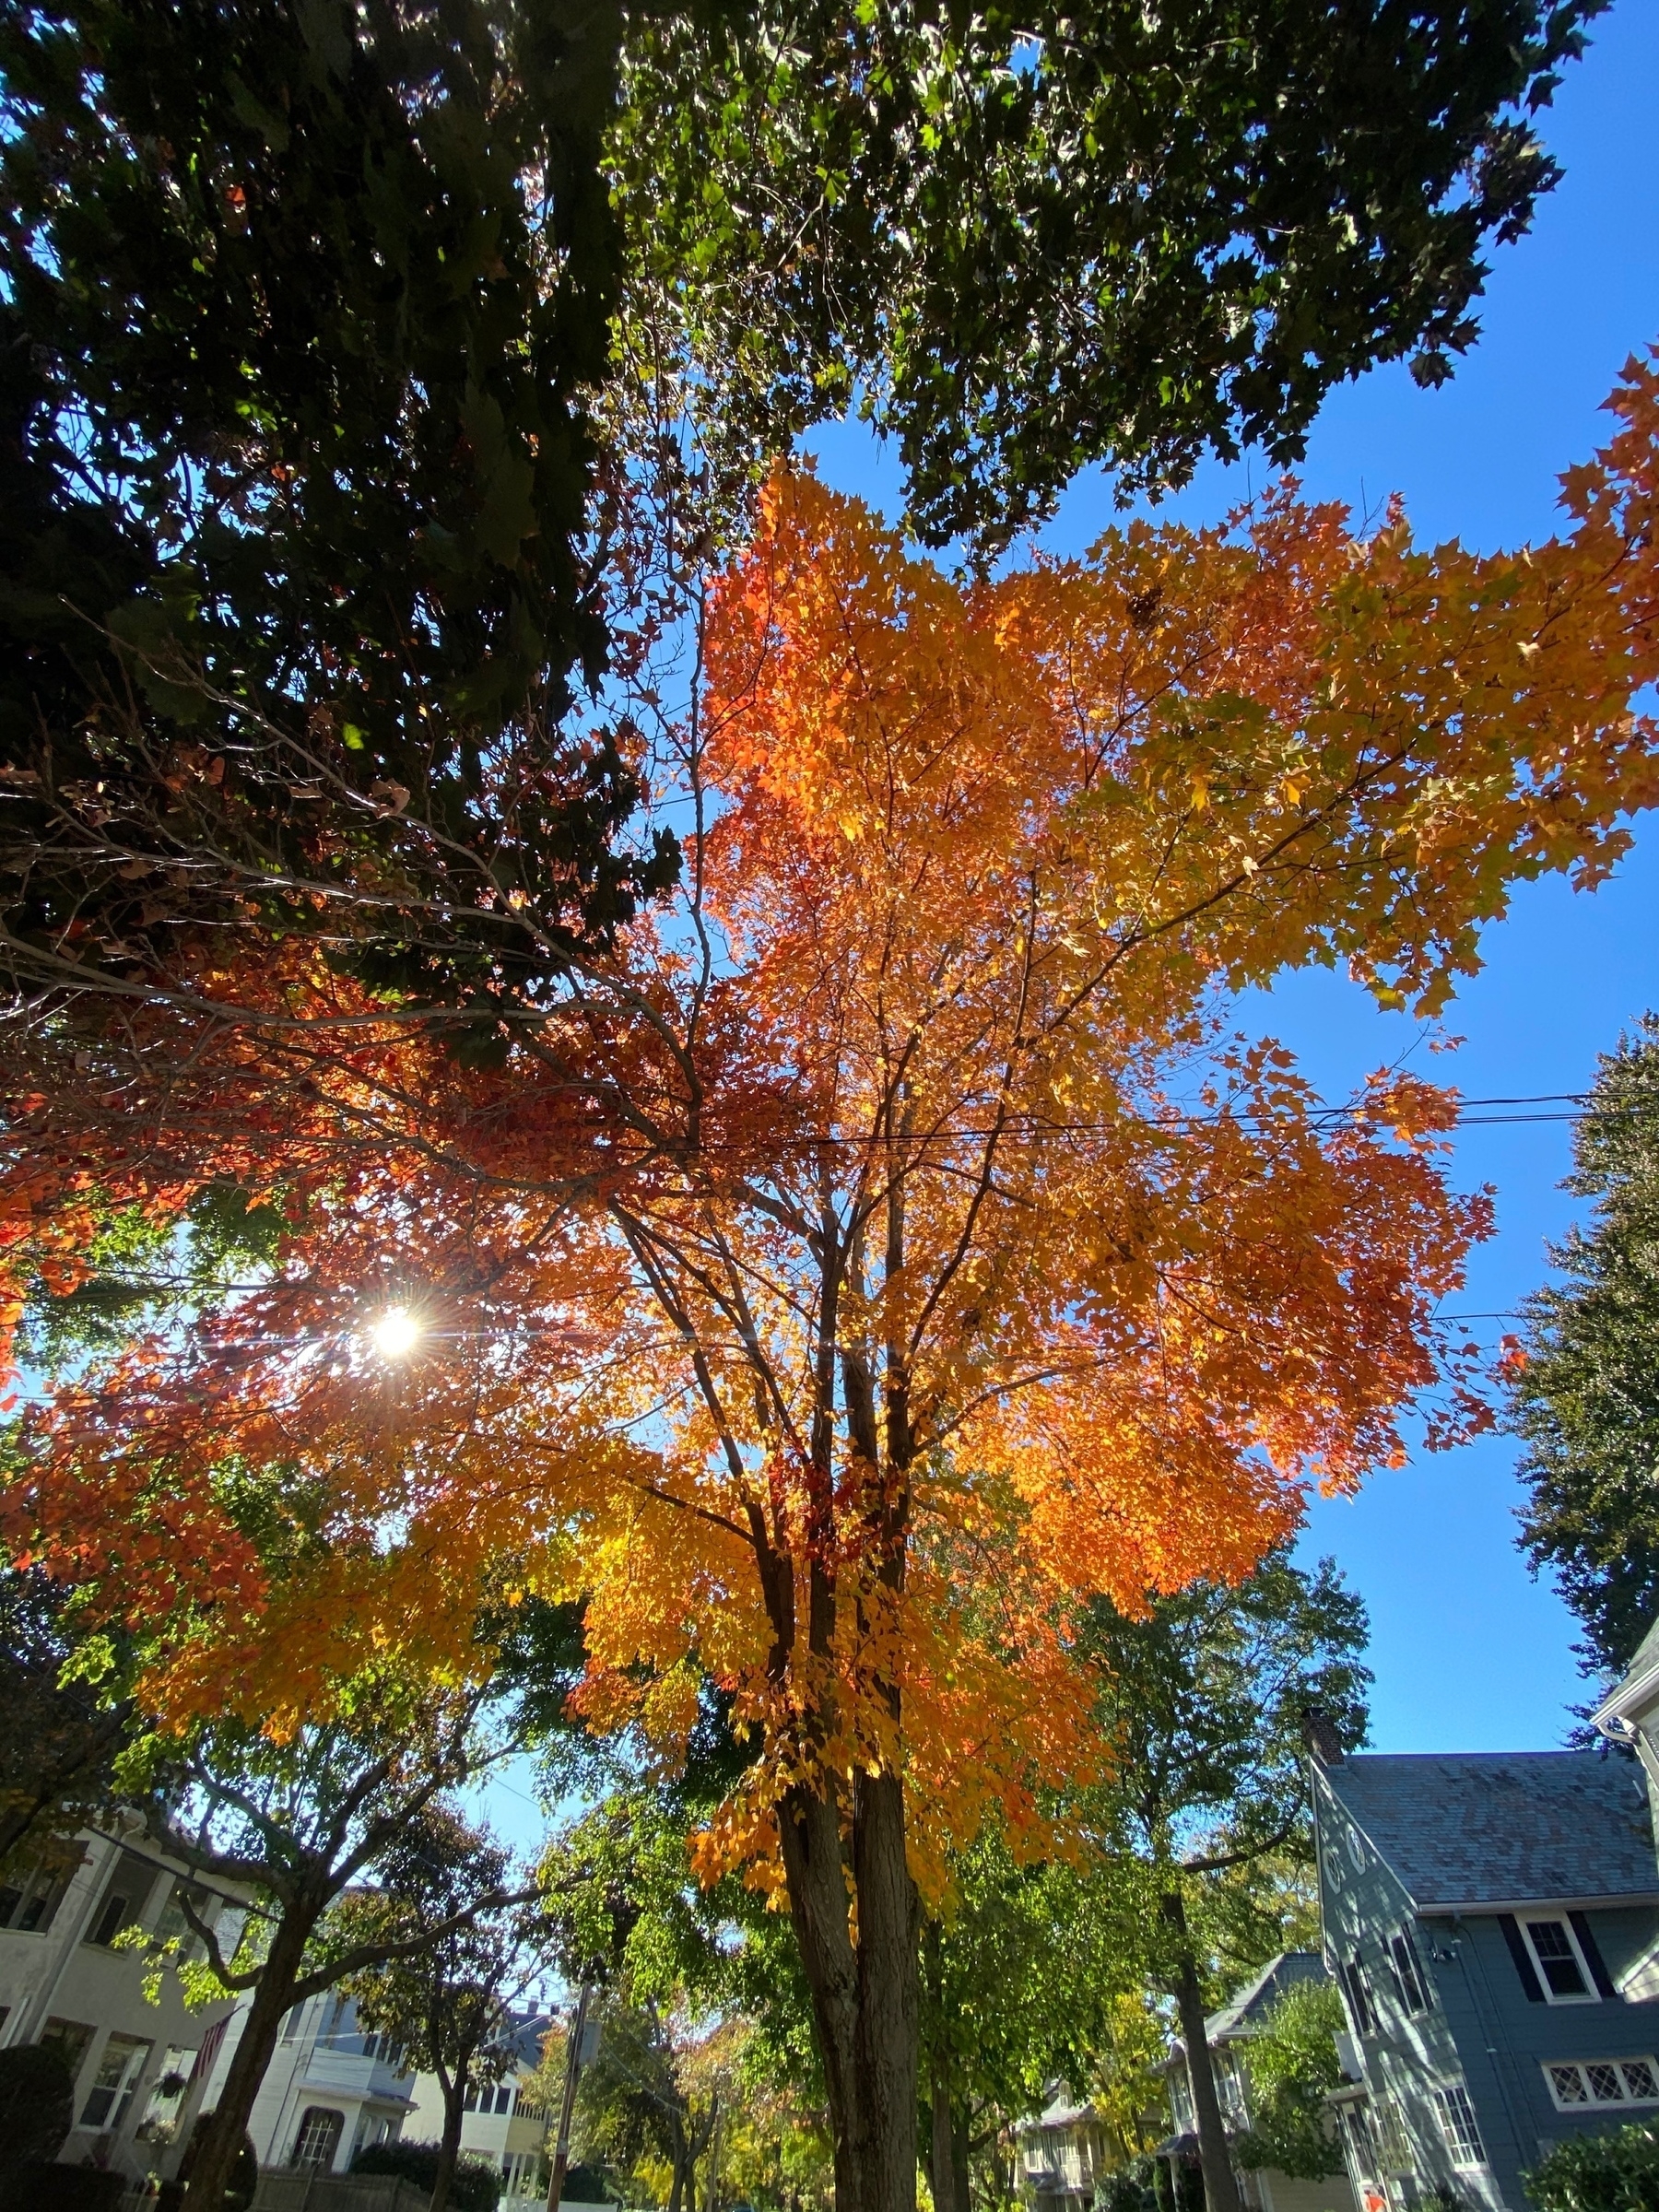 View from below of tree branches with a mix of green, red and yellow leaves, with the sun shining behind in a clear blue sky.